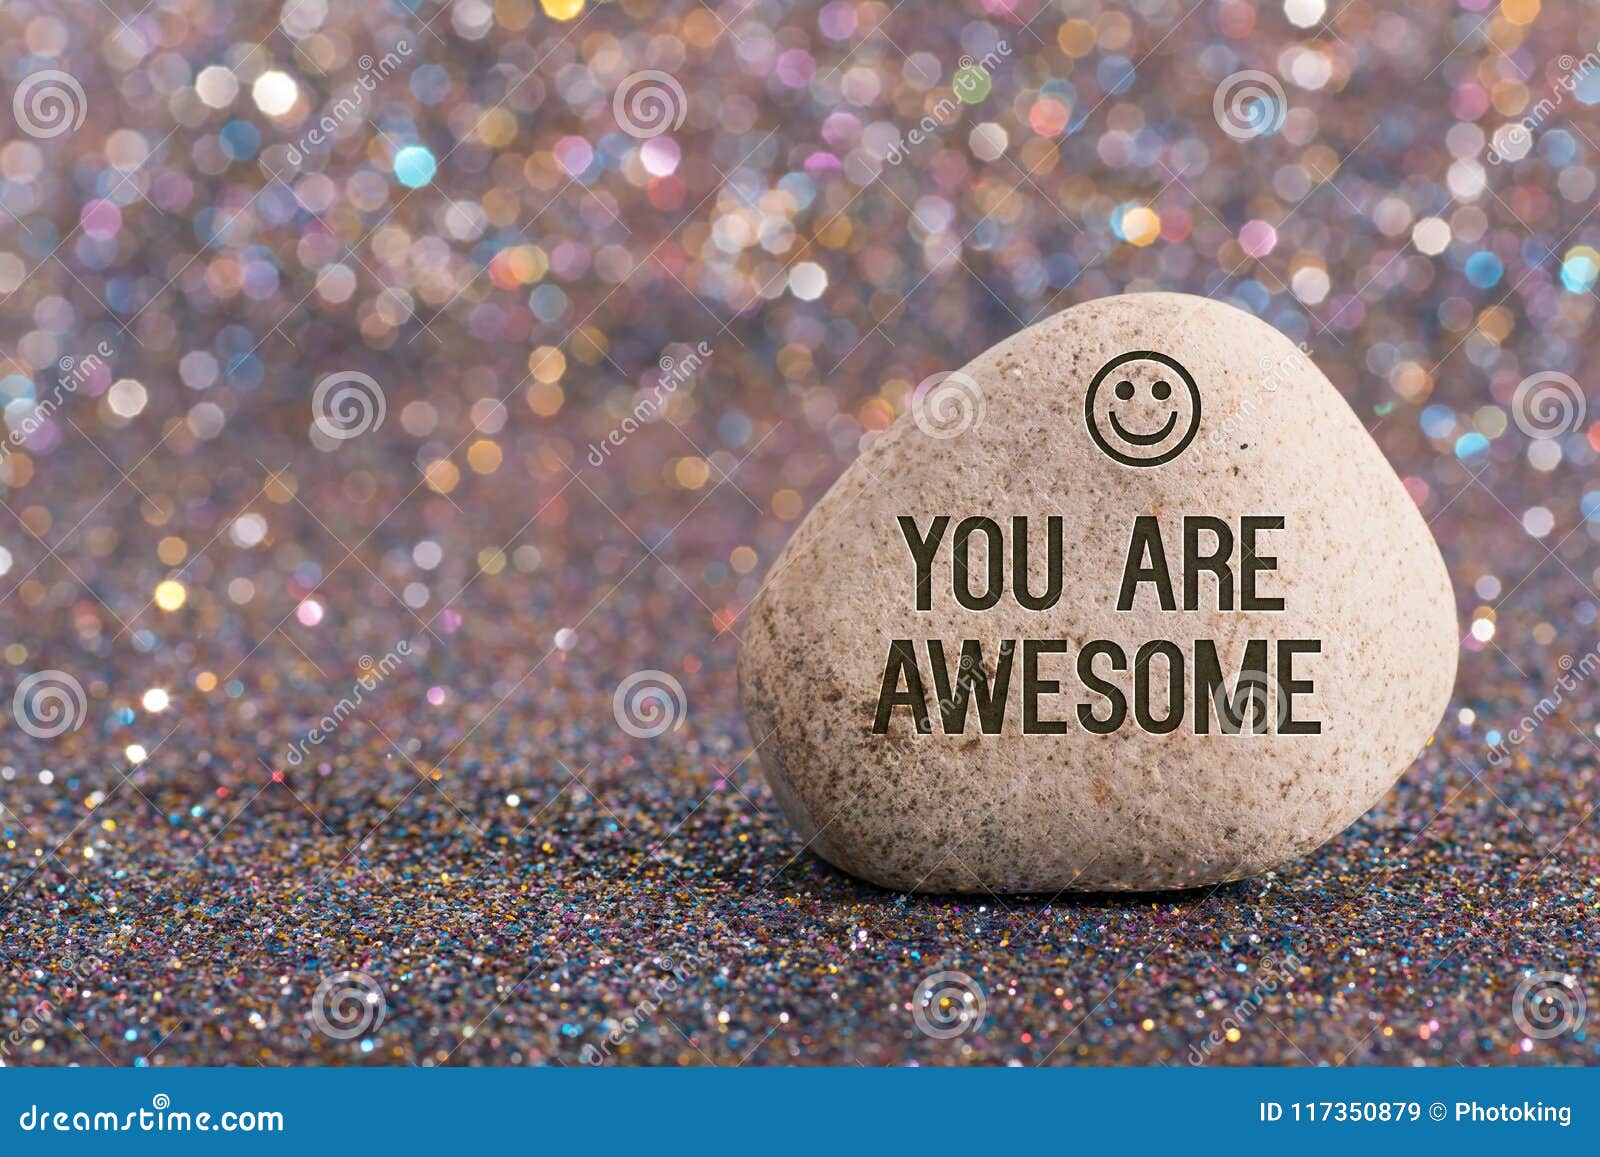 you are awesome on stone